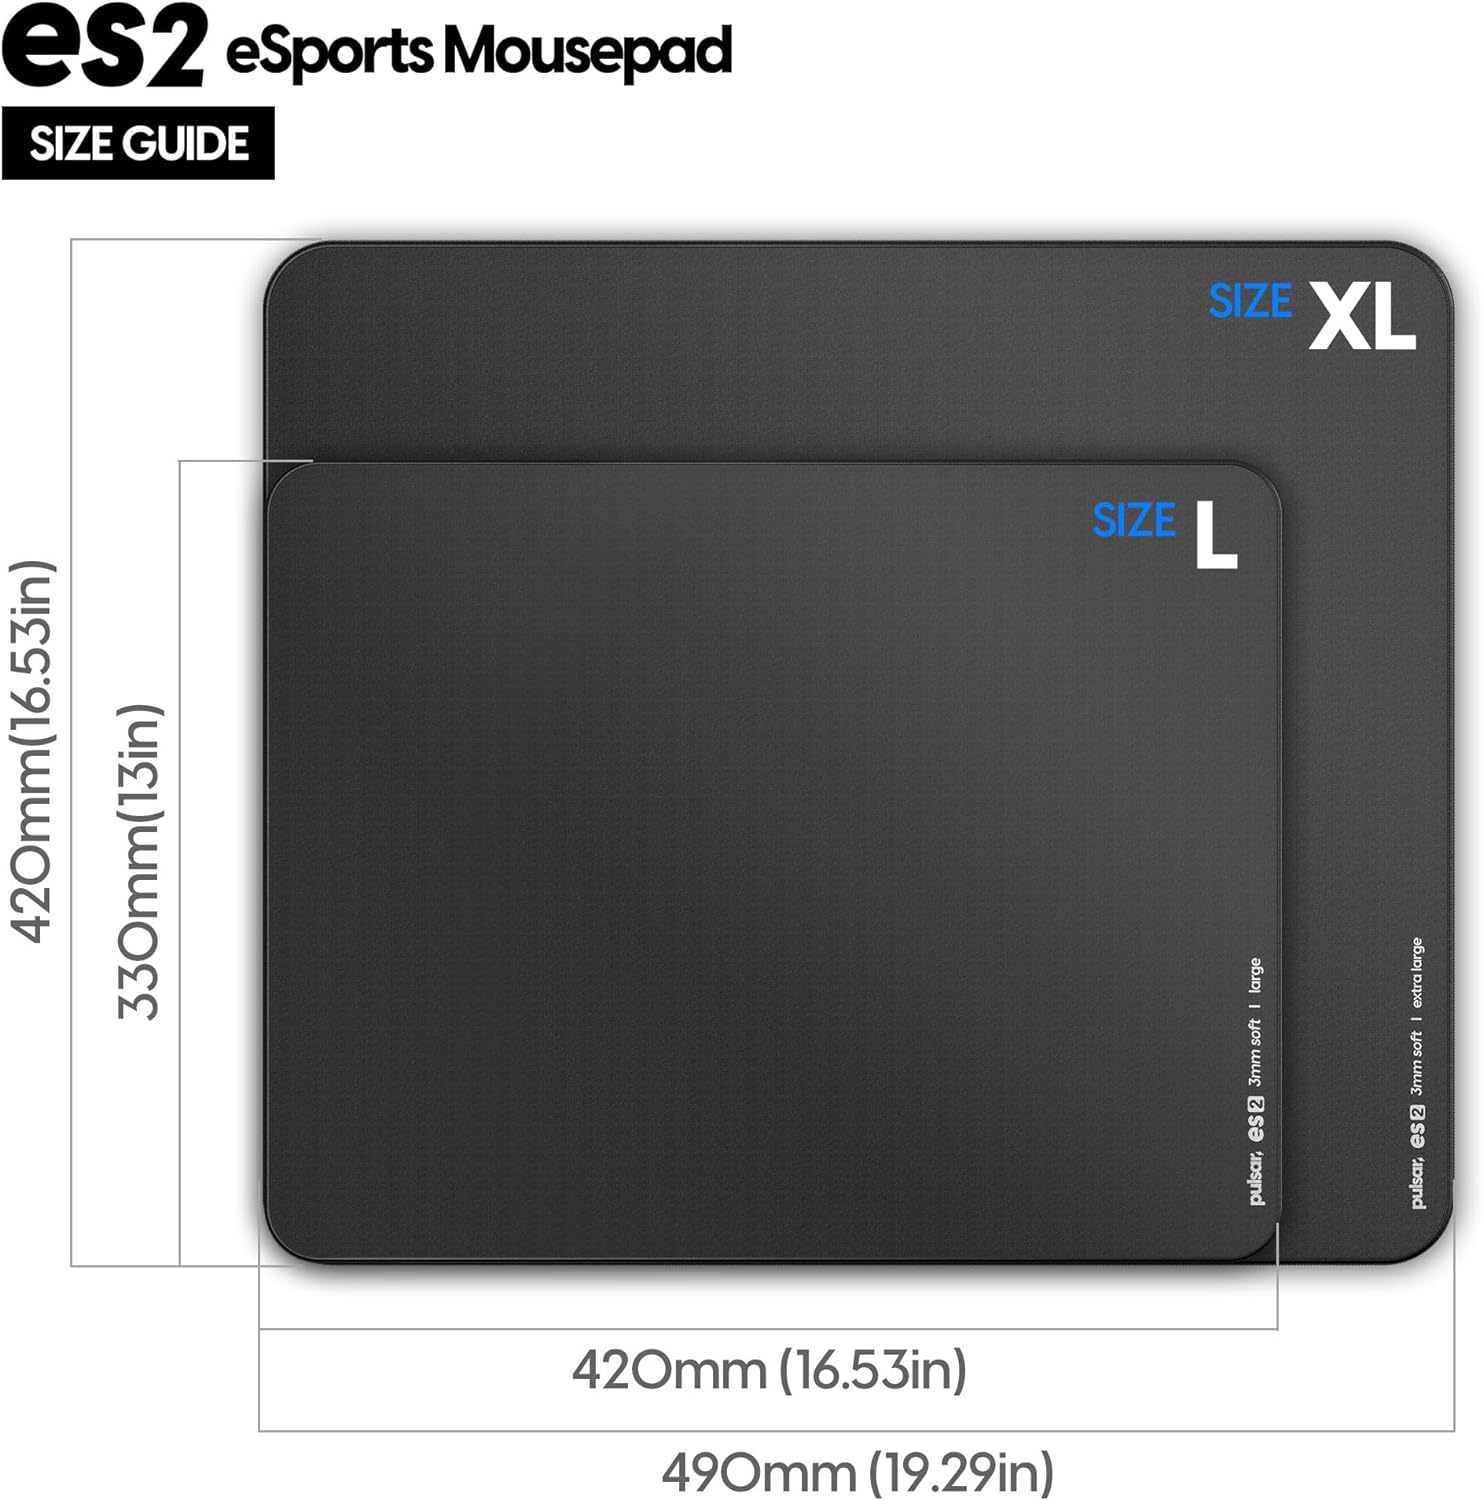 A large marketing image providing additional information about the product Pulsar ES2 Mousepad 3mm Large - Black - Additional alt info not provided